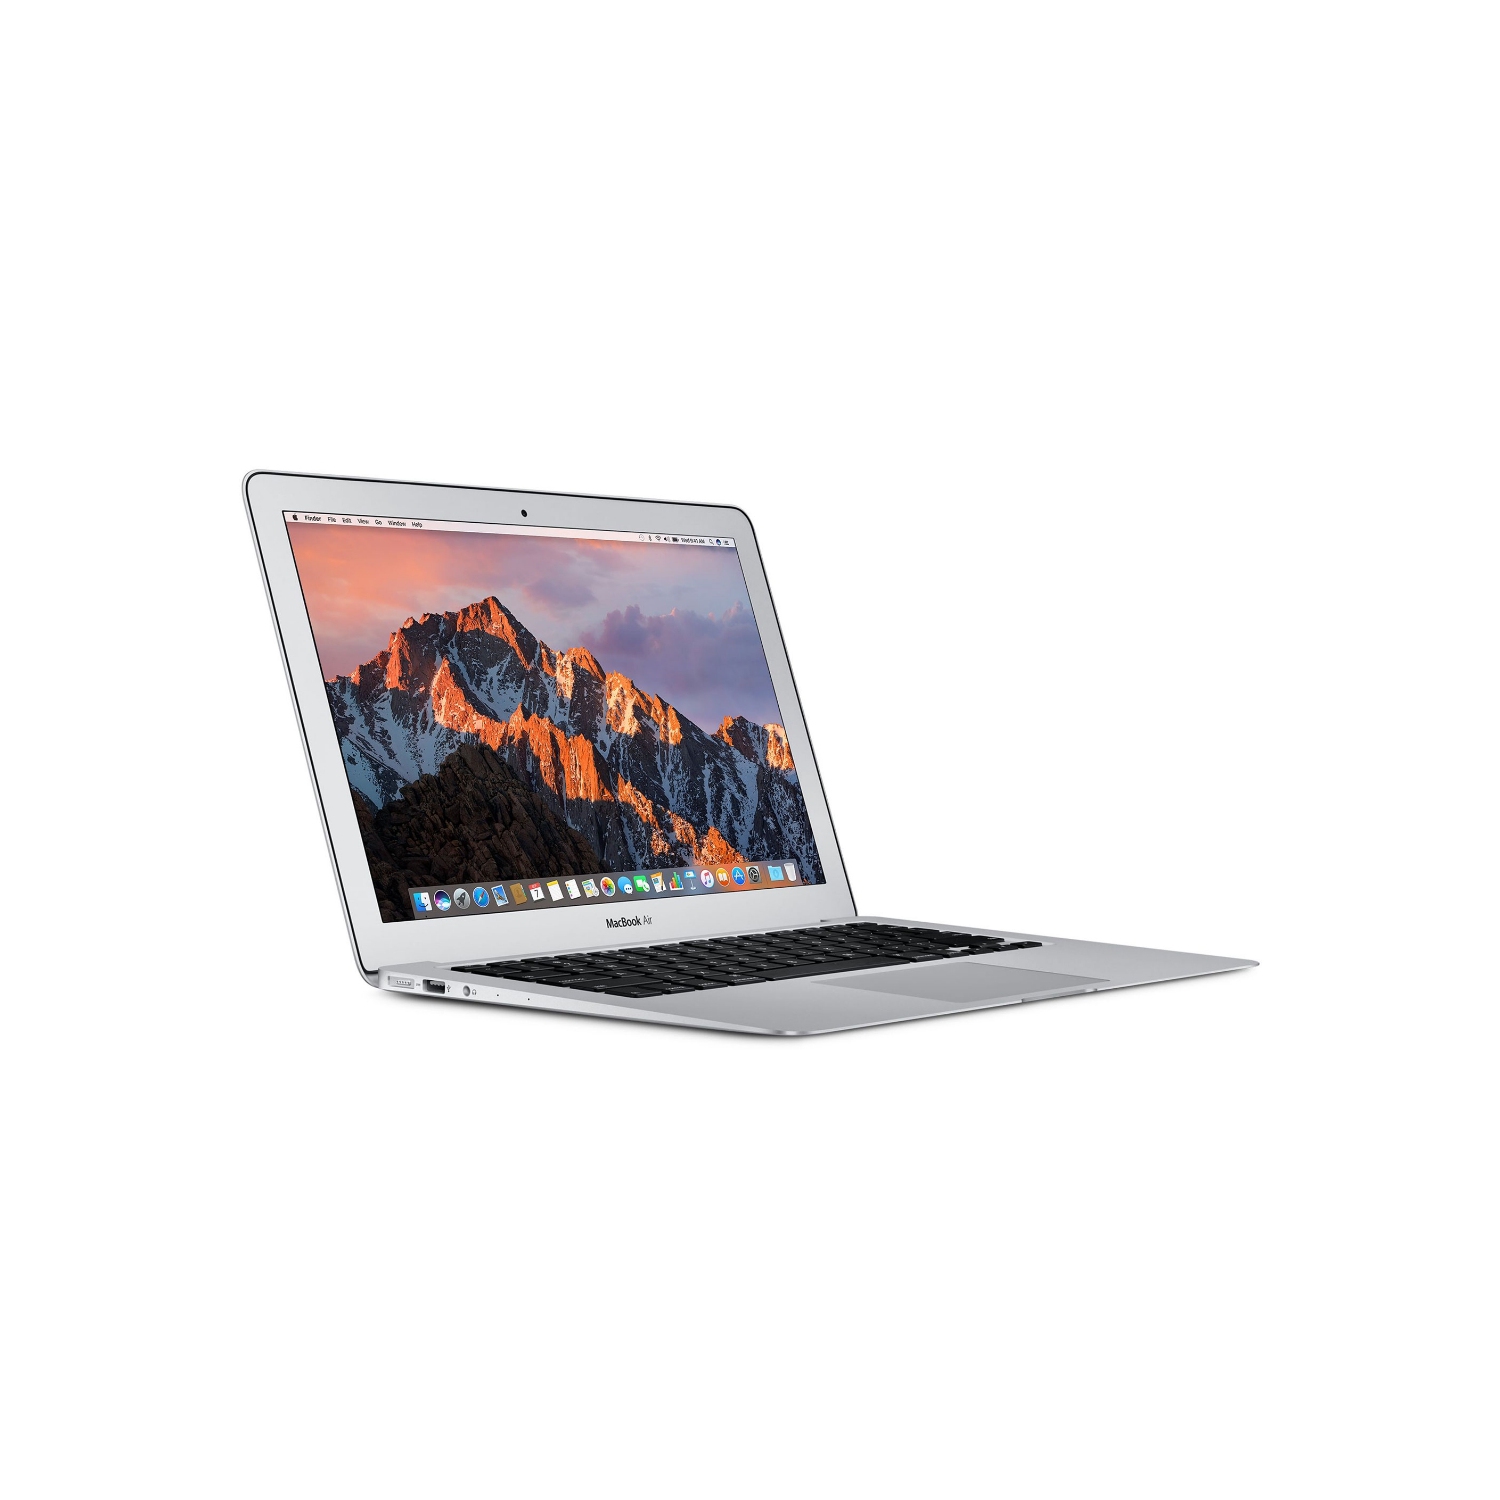 Refurbished (Excellent) - Apple MacBook Air 13.3" Laptop - Intel Core i5 - 8GB RAM - 256GB SSD - MMGG2LL/A (Early 2015) - Certified Refurbished